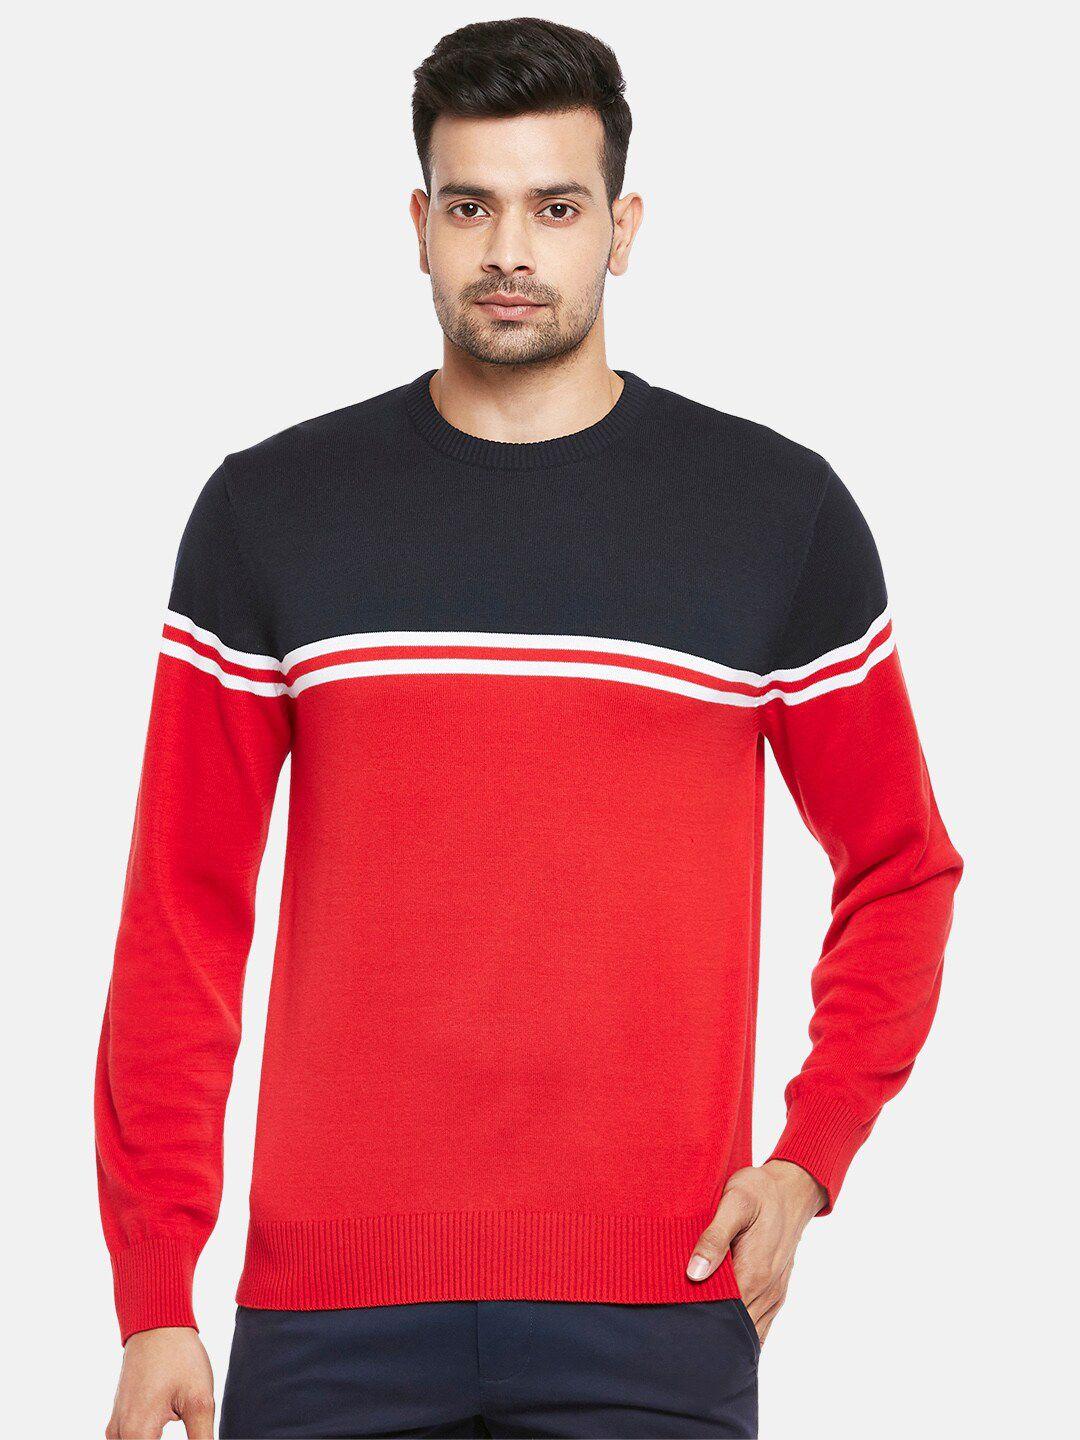 byford-by-pantaloons-men-red-&-black-colourblocked-pullover-sweater